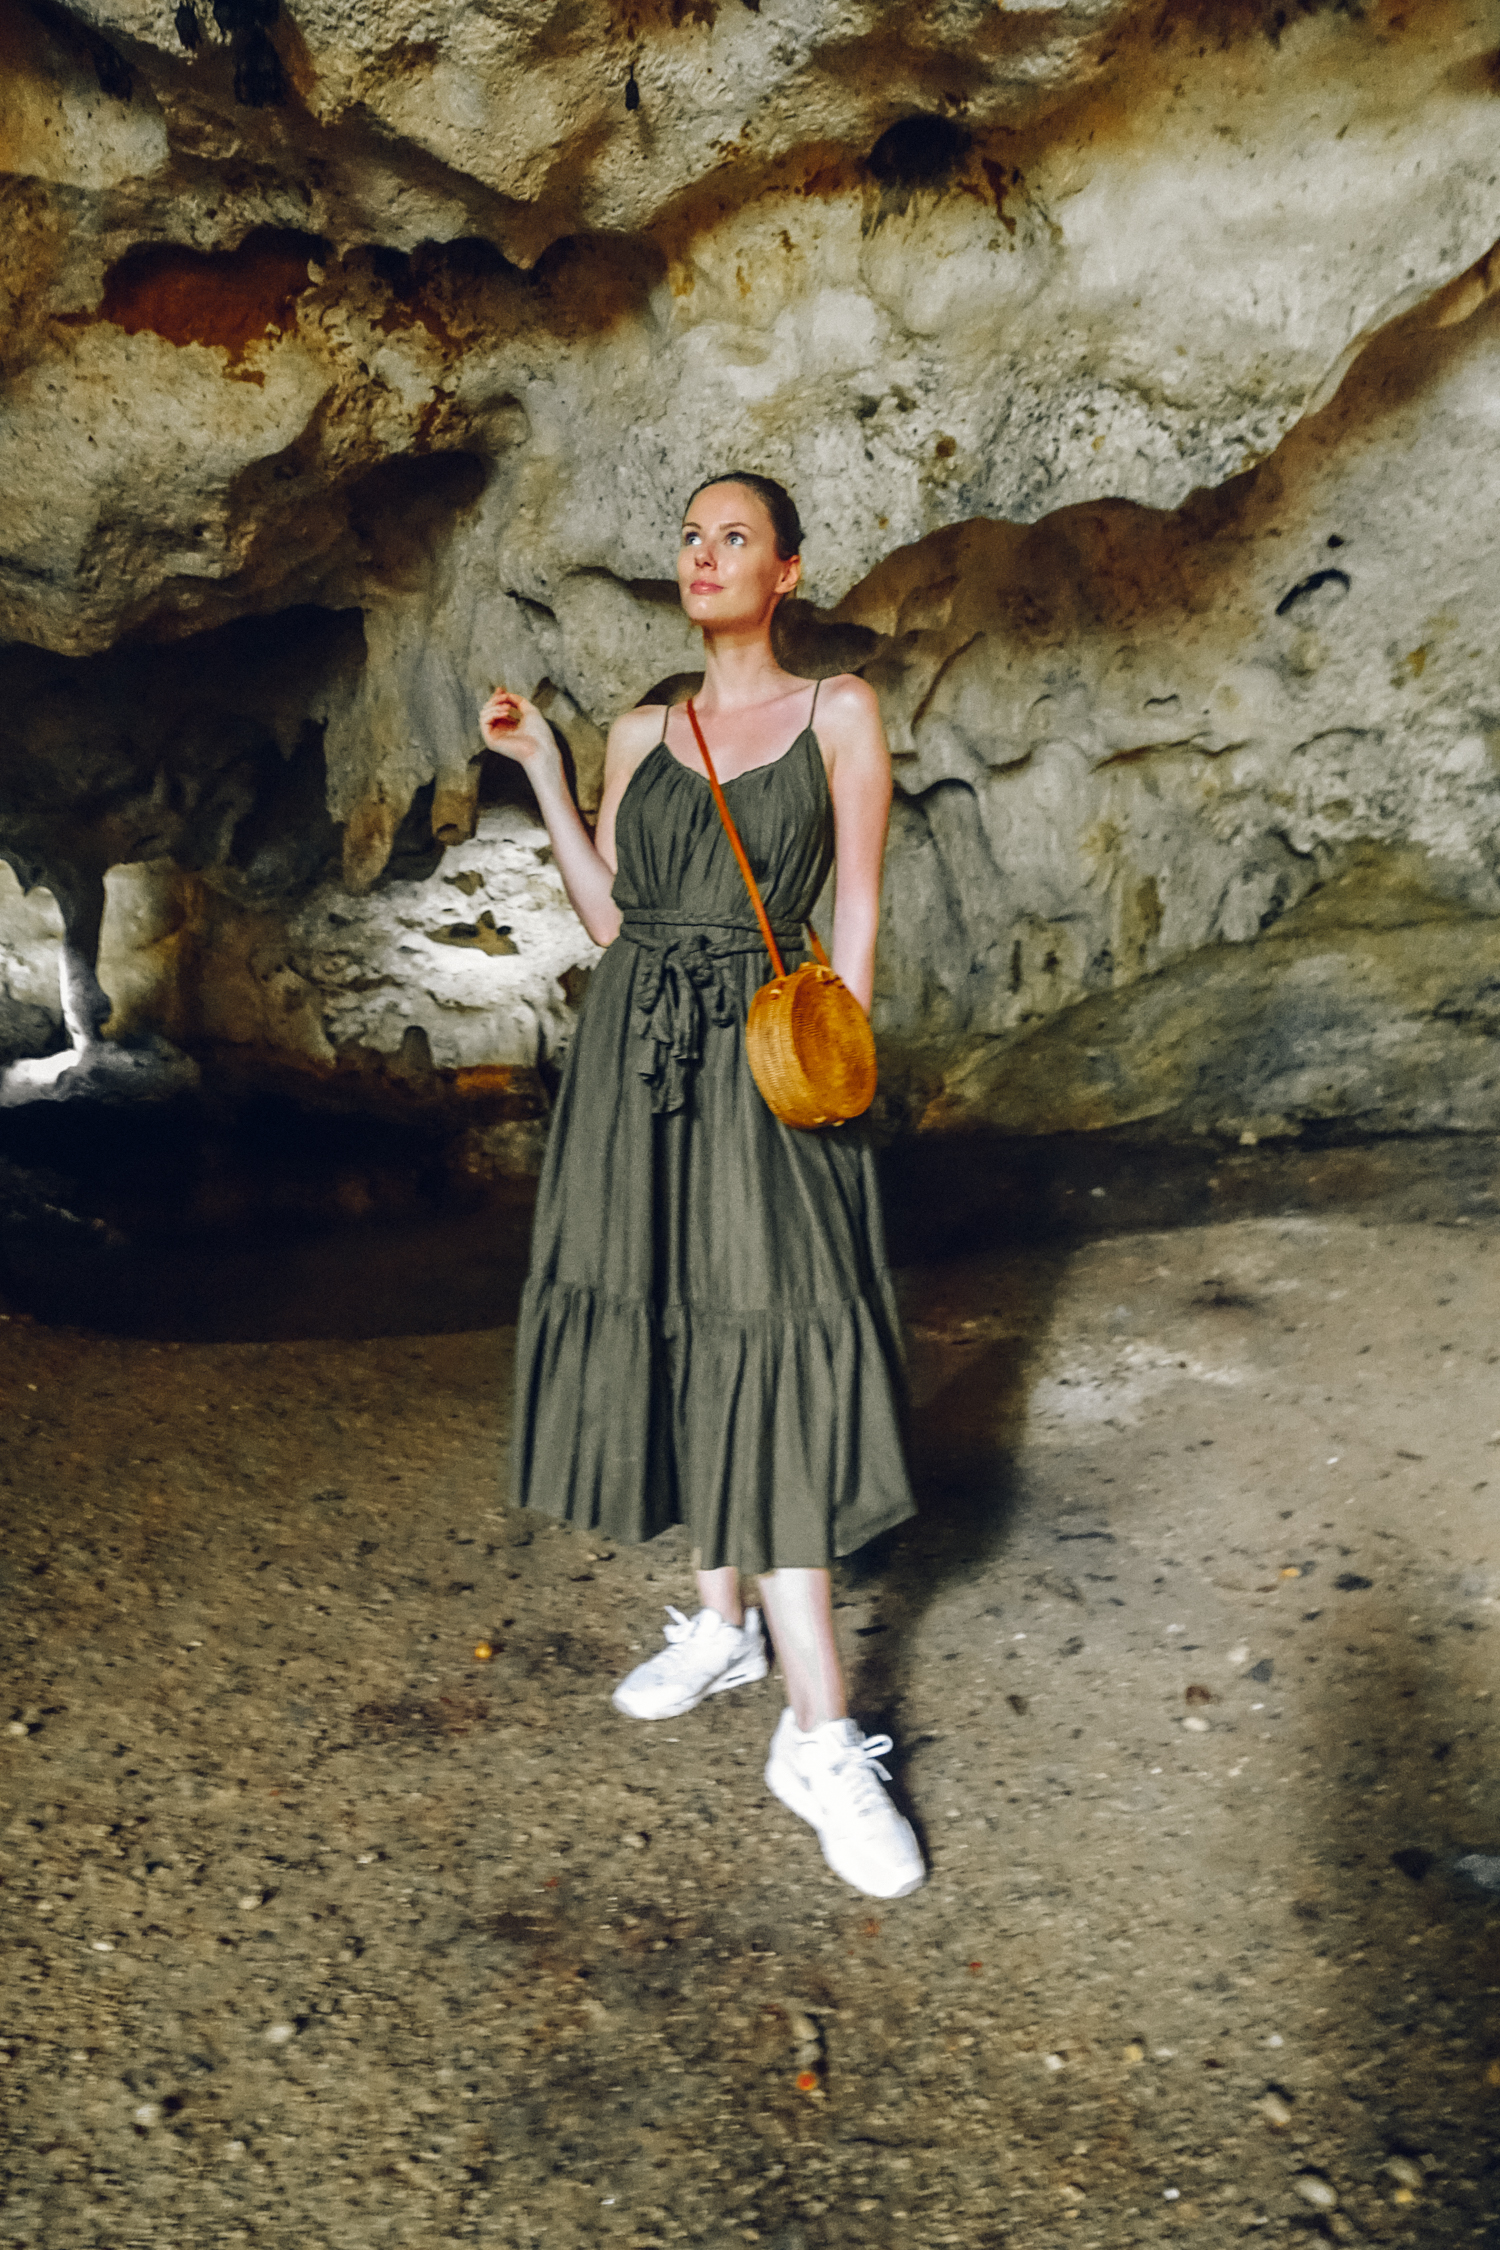 Alyssa Campanella of The A List blog visits Cayman Islands and explores Cayman Crystal Caves in Rhode Resort Lea dress